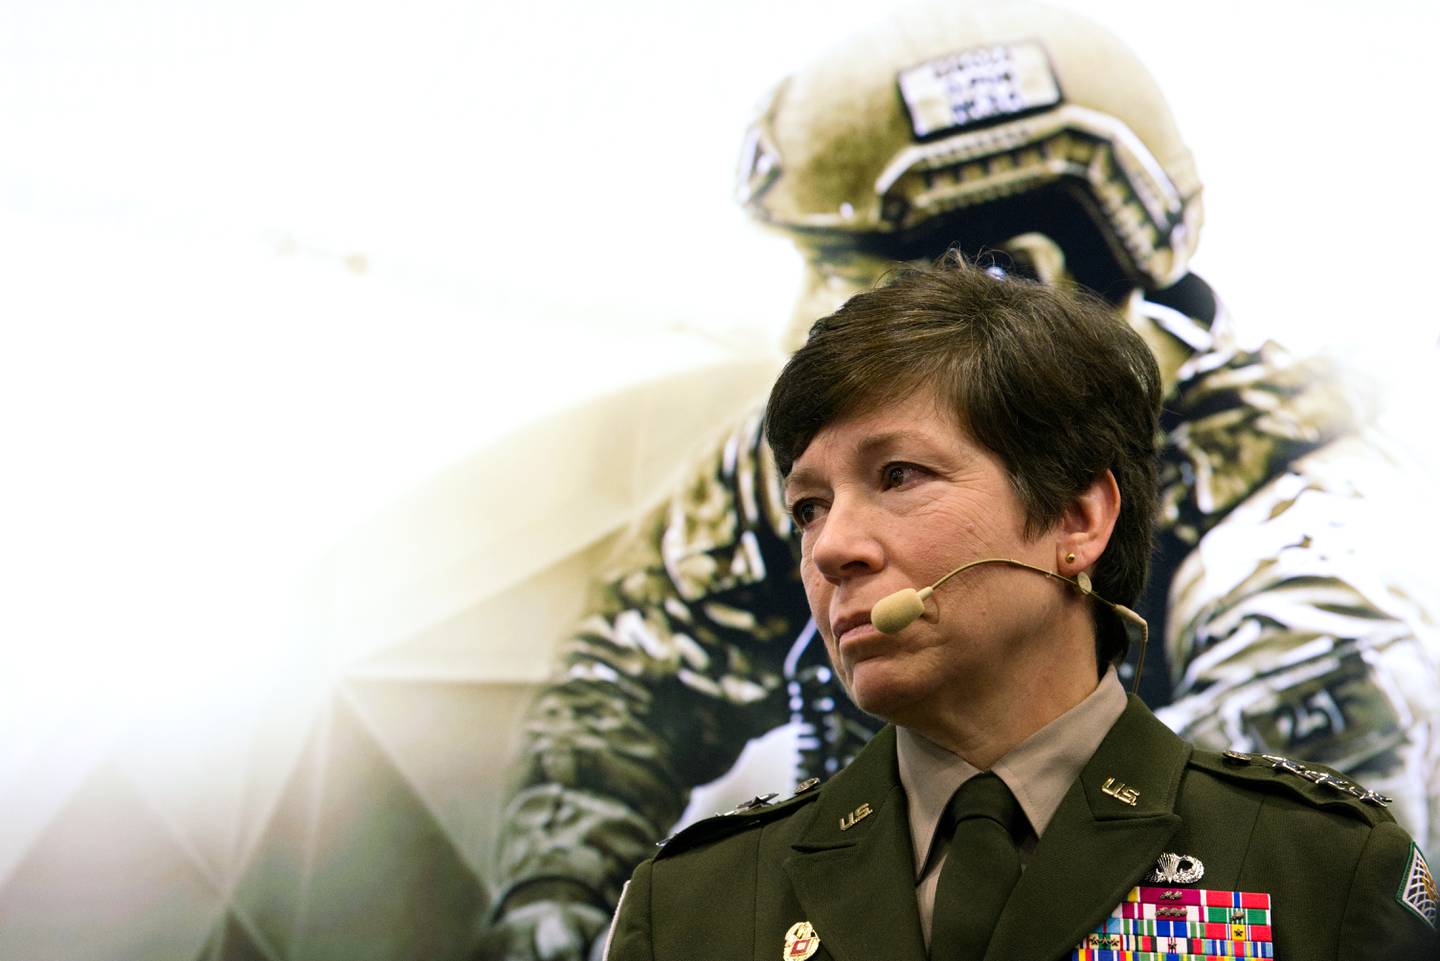 Lt. Gen. Maria Barrett, the leader of U.S. Army Cyber Command, stands Oct. 11 at the Warrior's Corner at the Association of the U.S. Army annual convention in Washington, D.C.